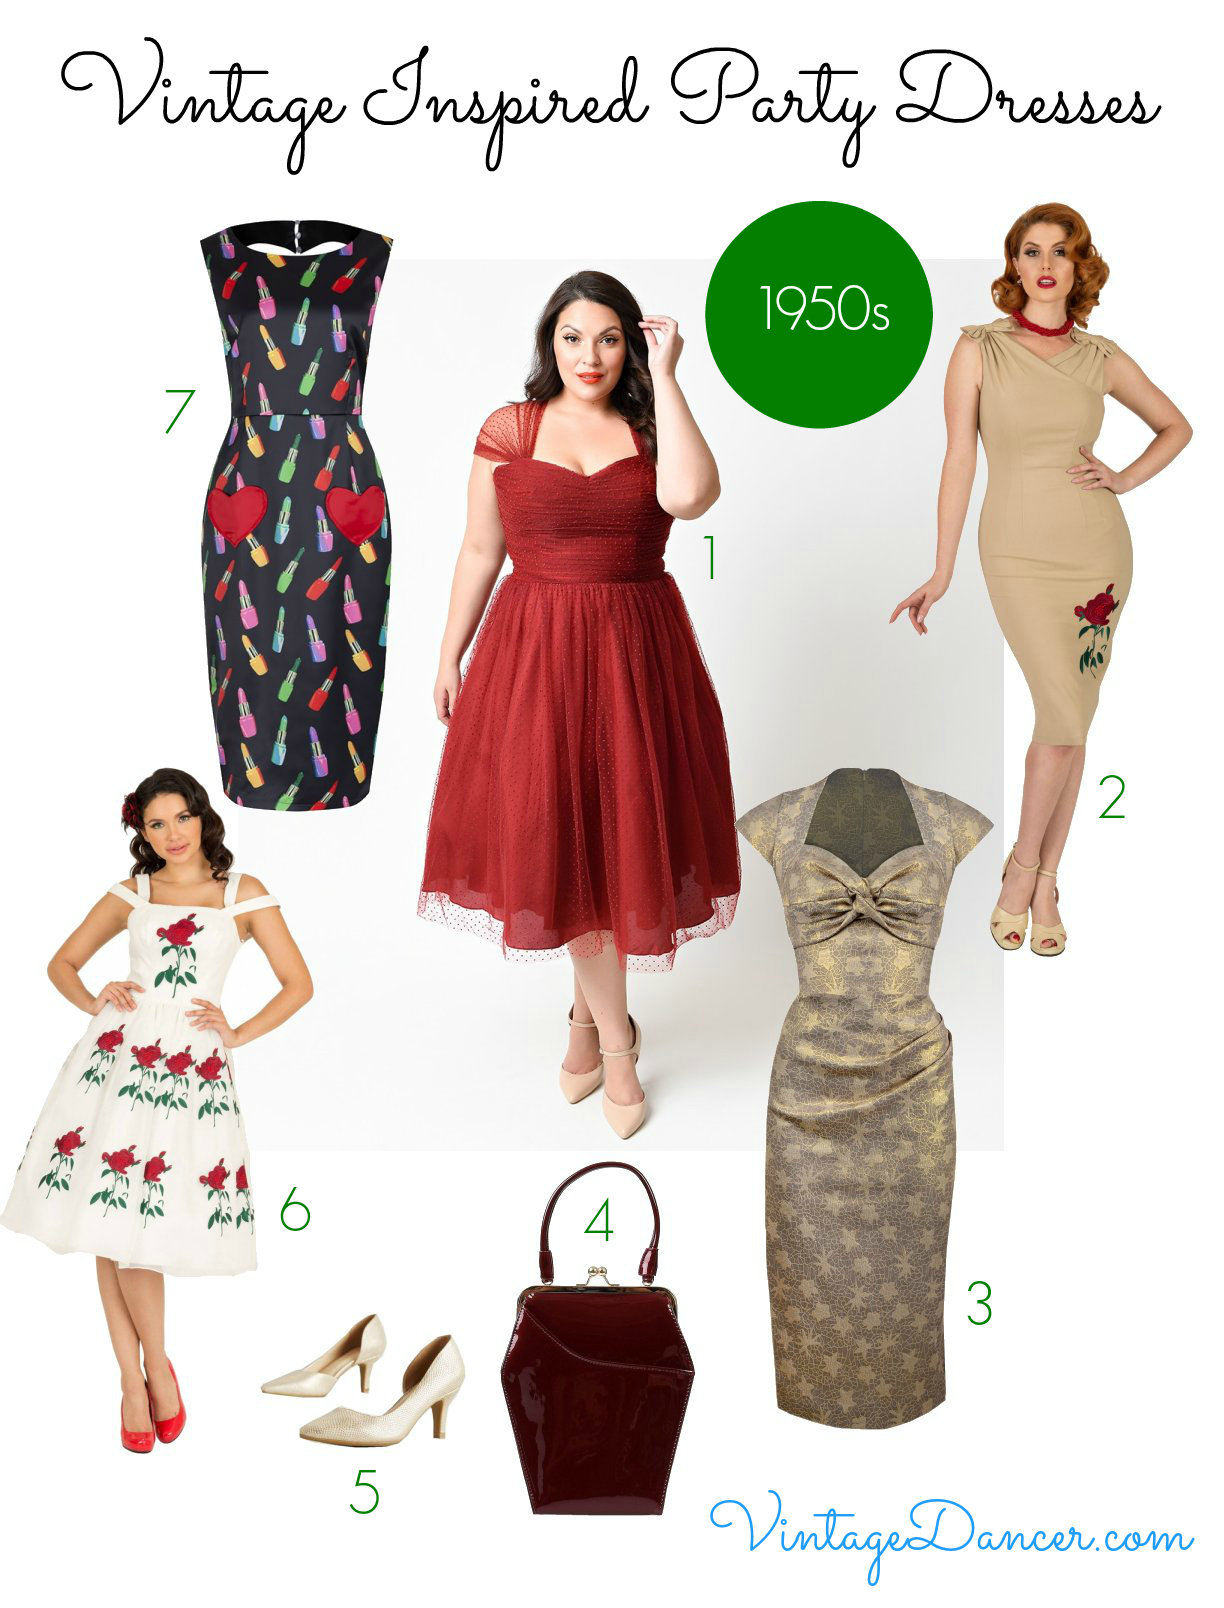 Vintage Inspired Party Dresses 104